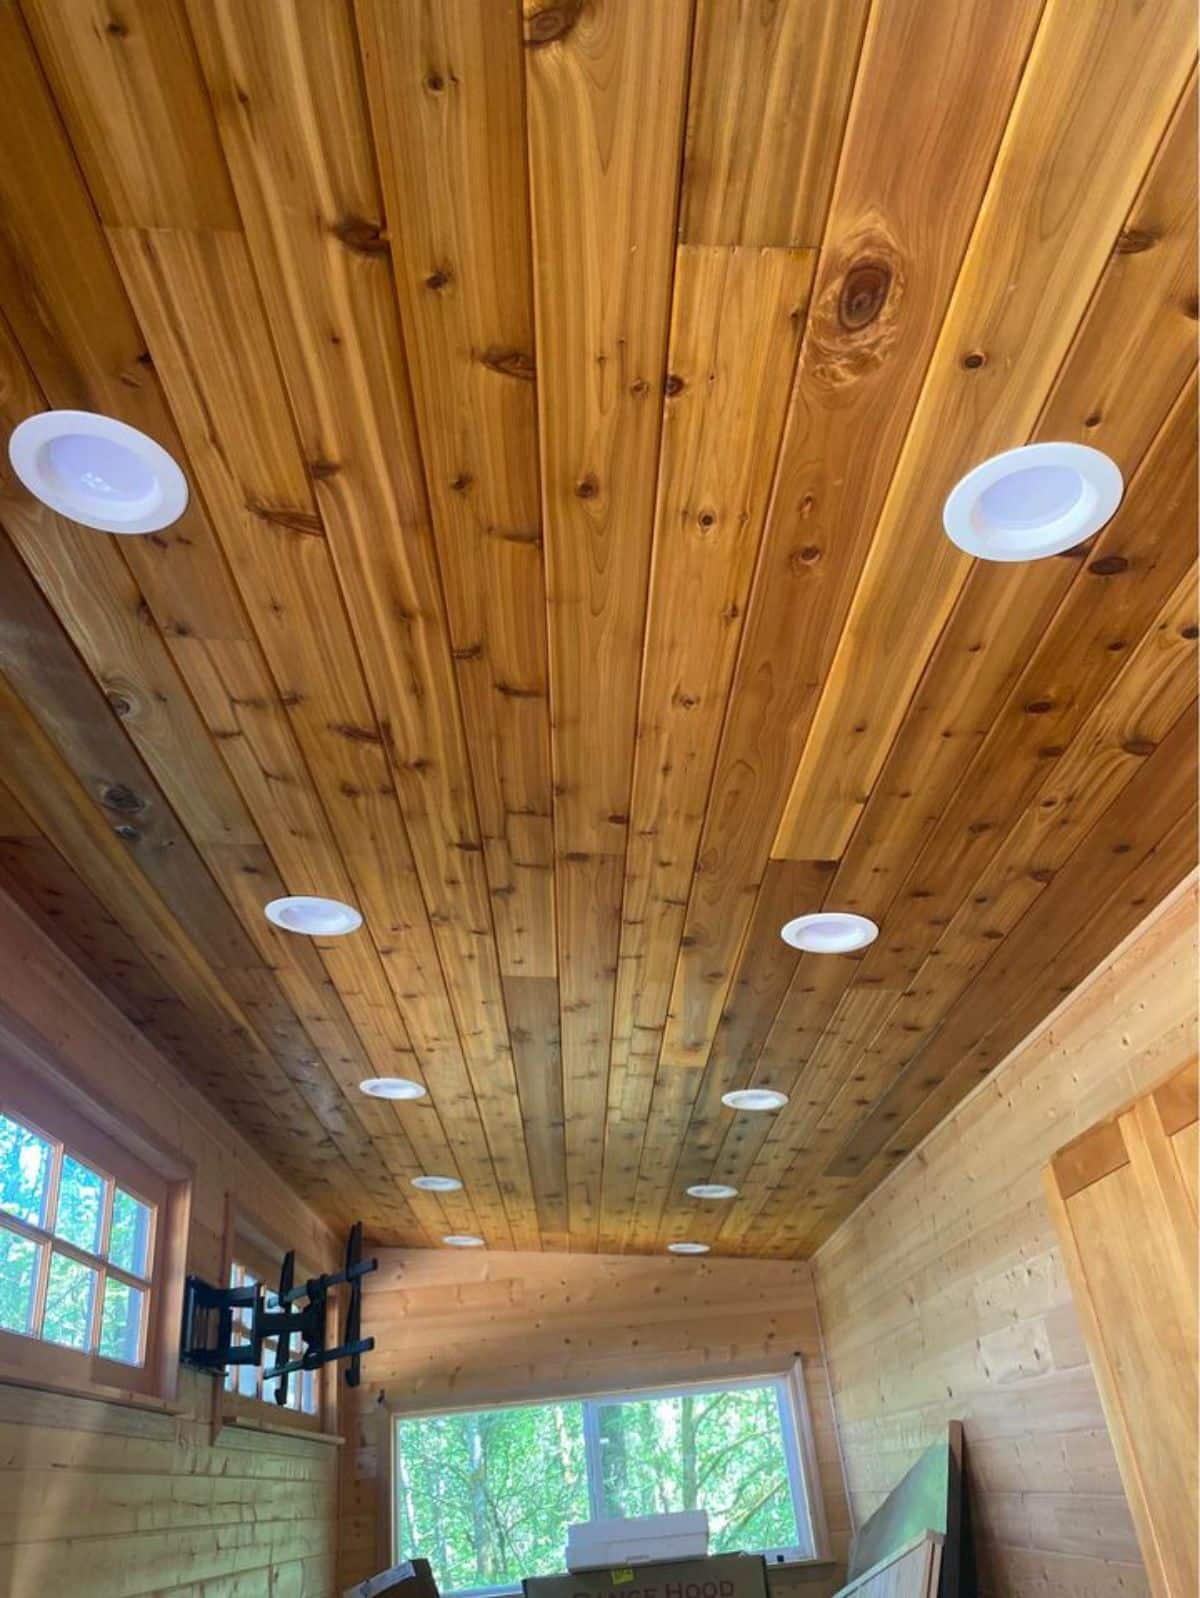 LED lights installed on the roof of insulated tiny home